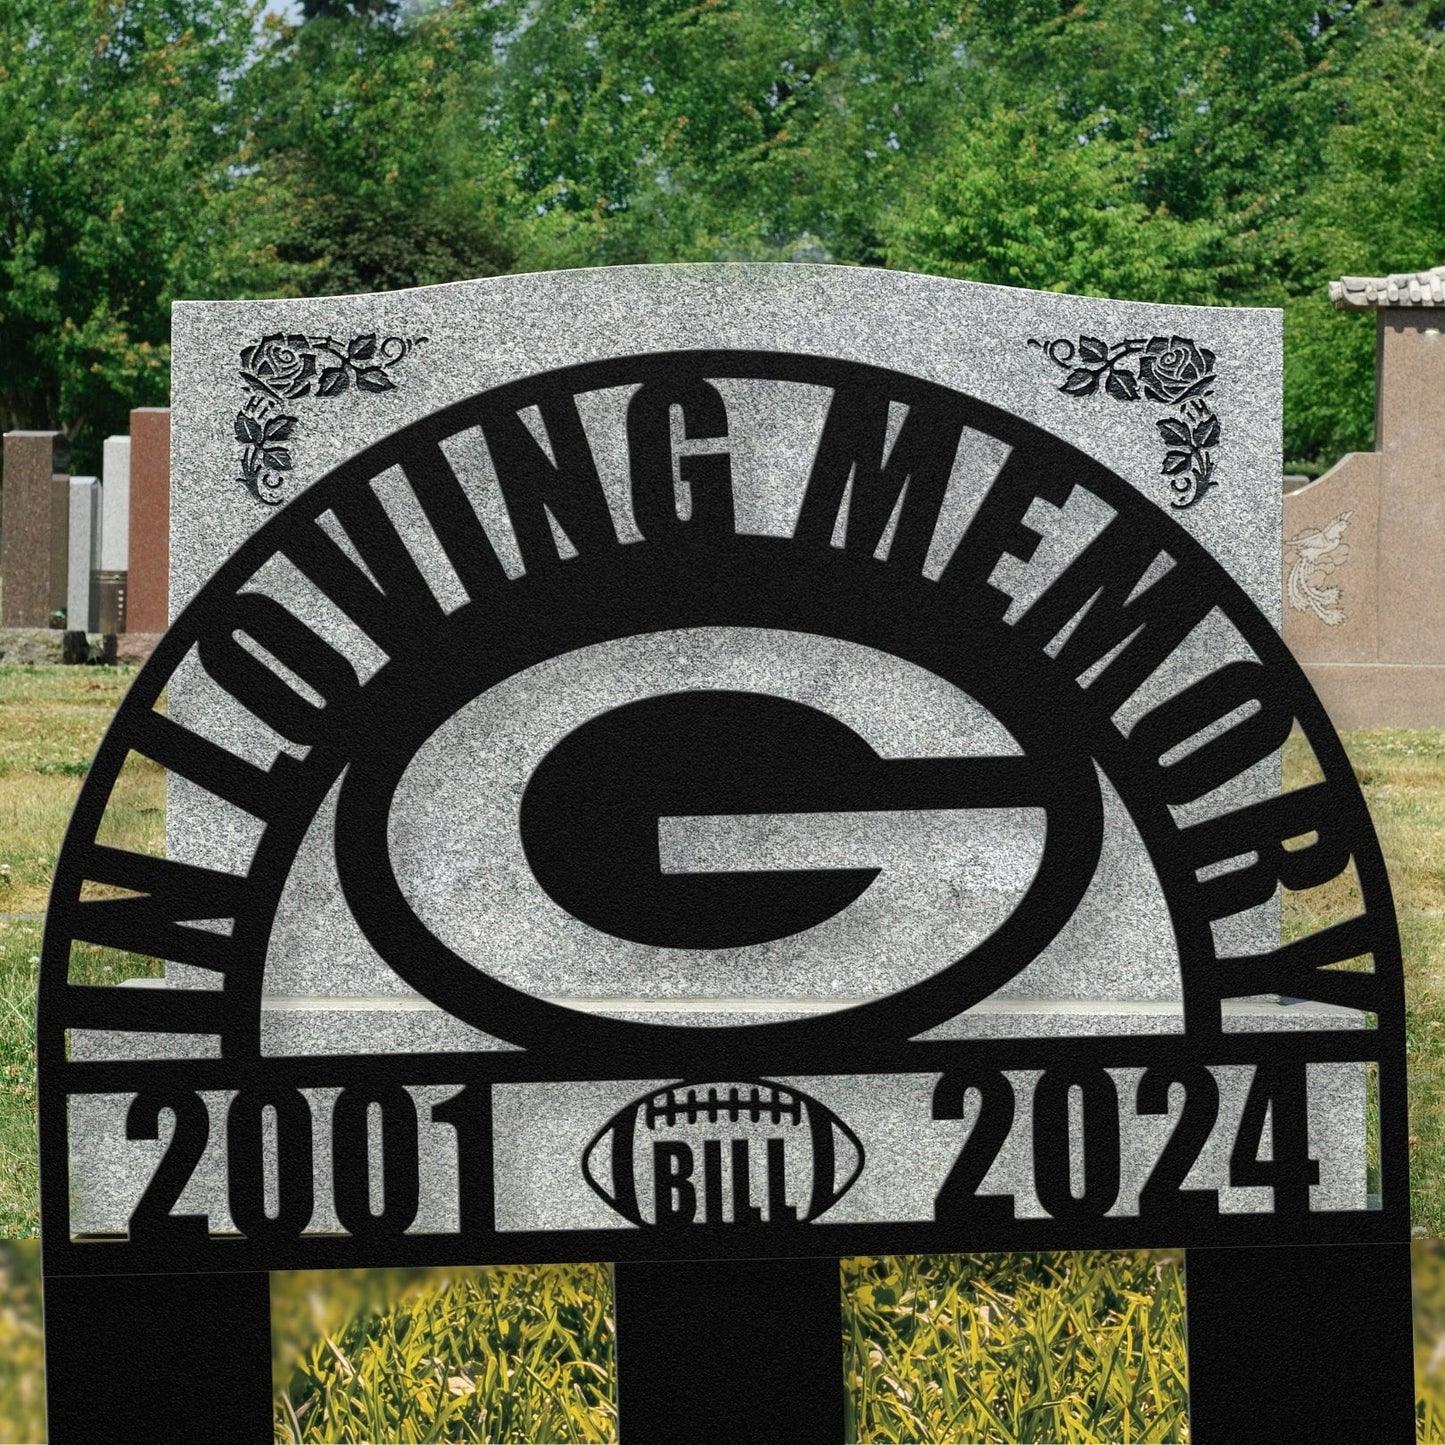 Personalized Green Bay Packers Football Memorial: A Sympathy Gift for Loss of a Beloved Cheesehead